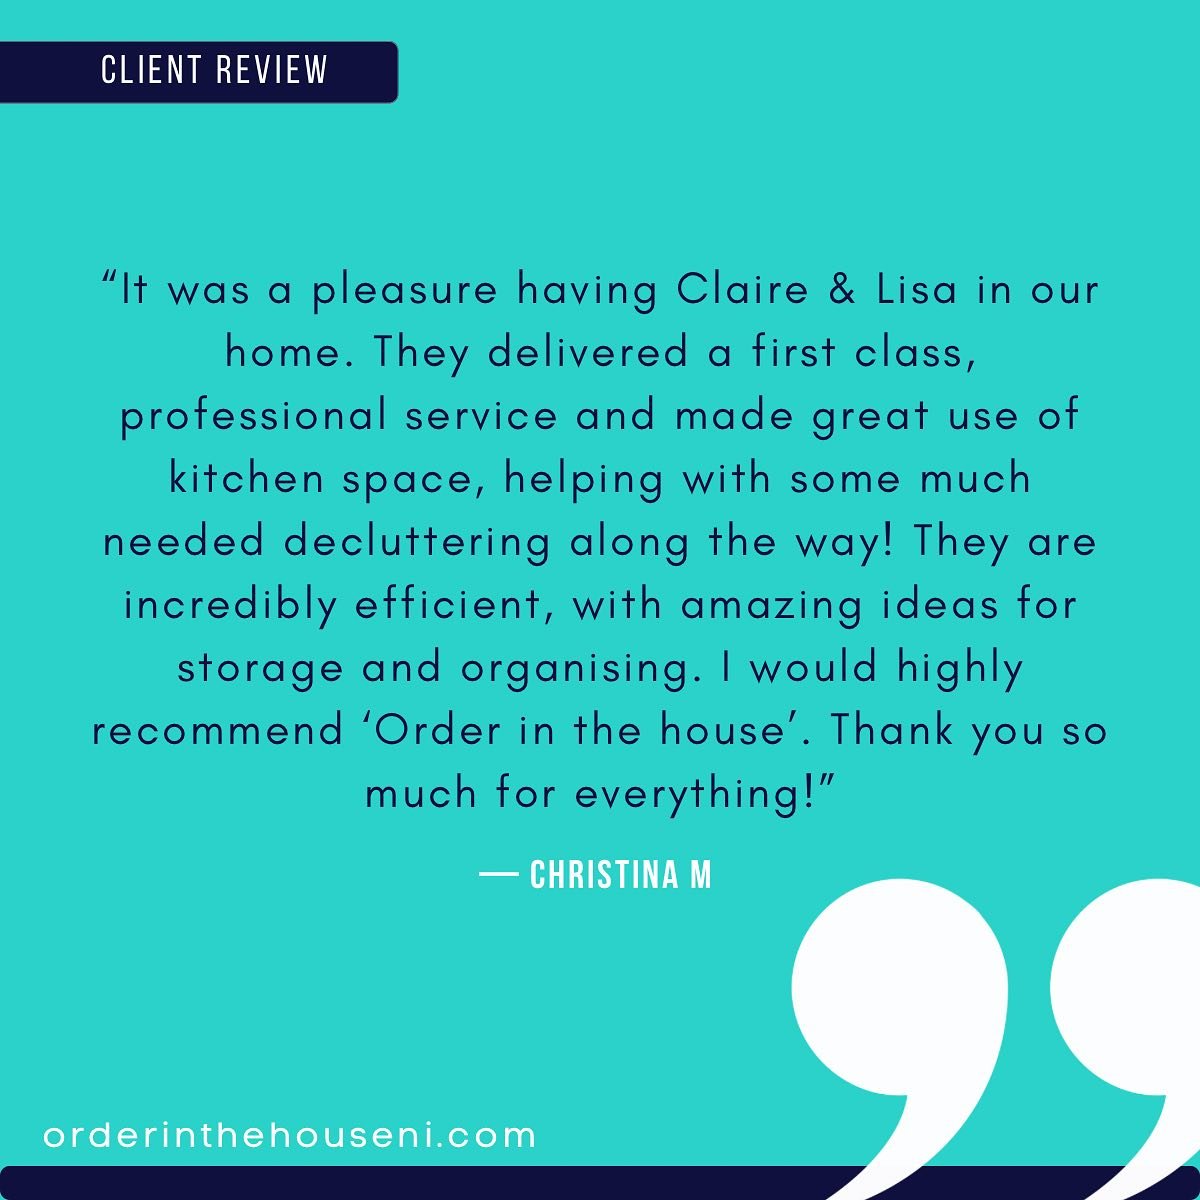 Ever wondered what it&rsquo;s like to have Order in the House come work in your home? 👆🏻

#orderinthehouse #organisewithstyle #clientreview #customersatisfaction #nihomes #nihomesandinteriors